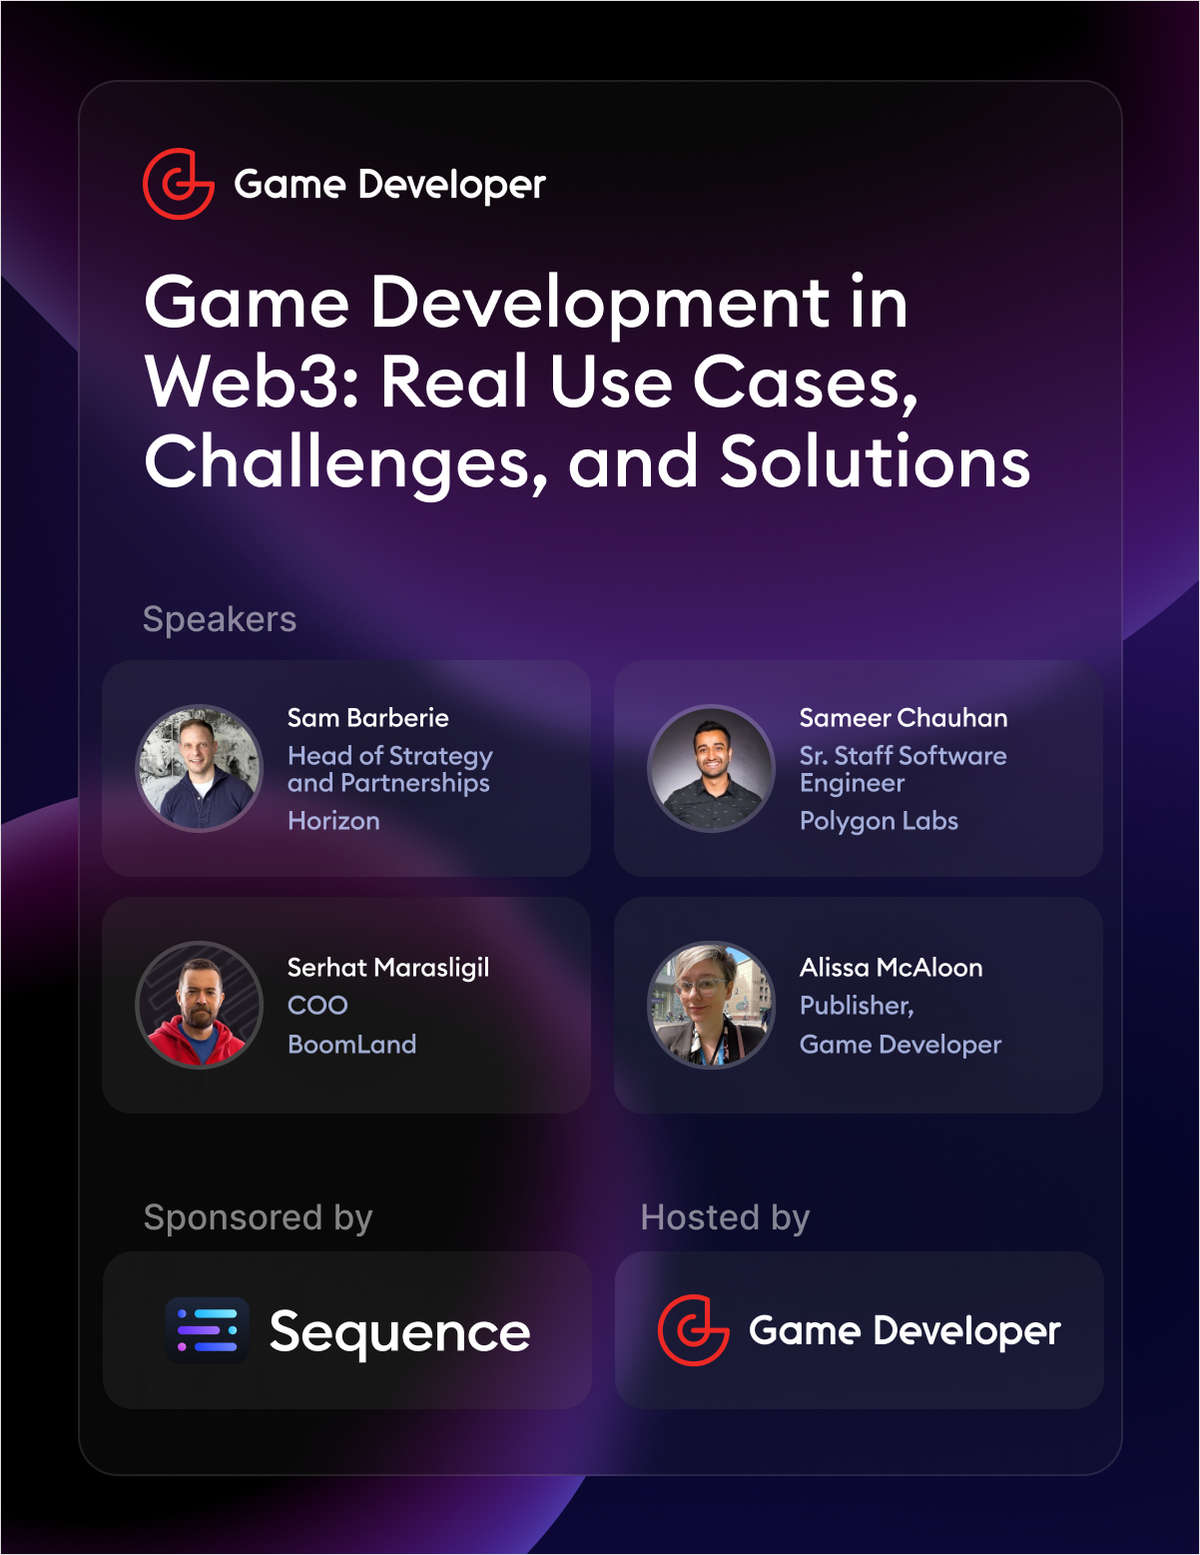 Game Development in Web3: Real Use Cases, Challenges, and Solutions